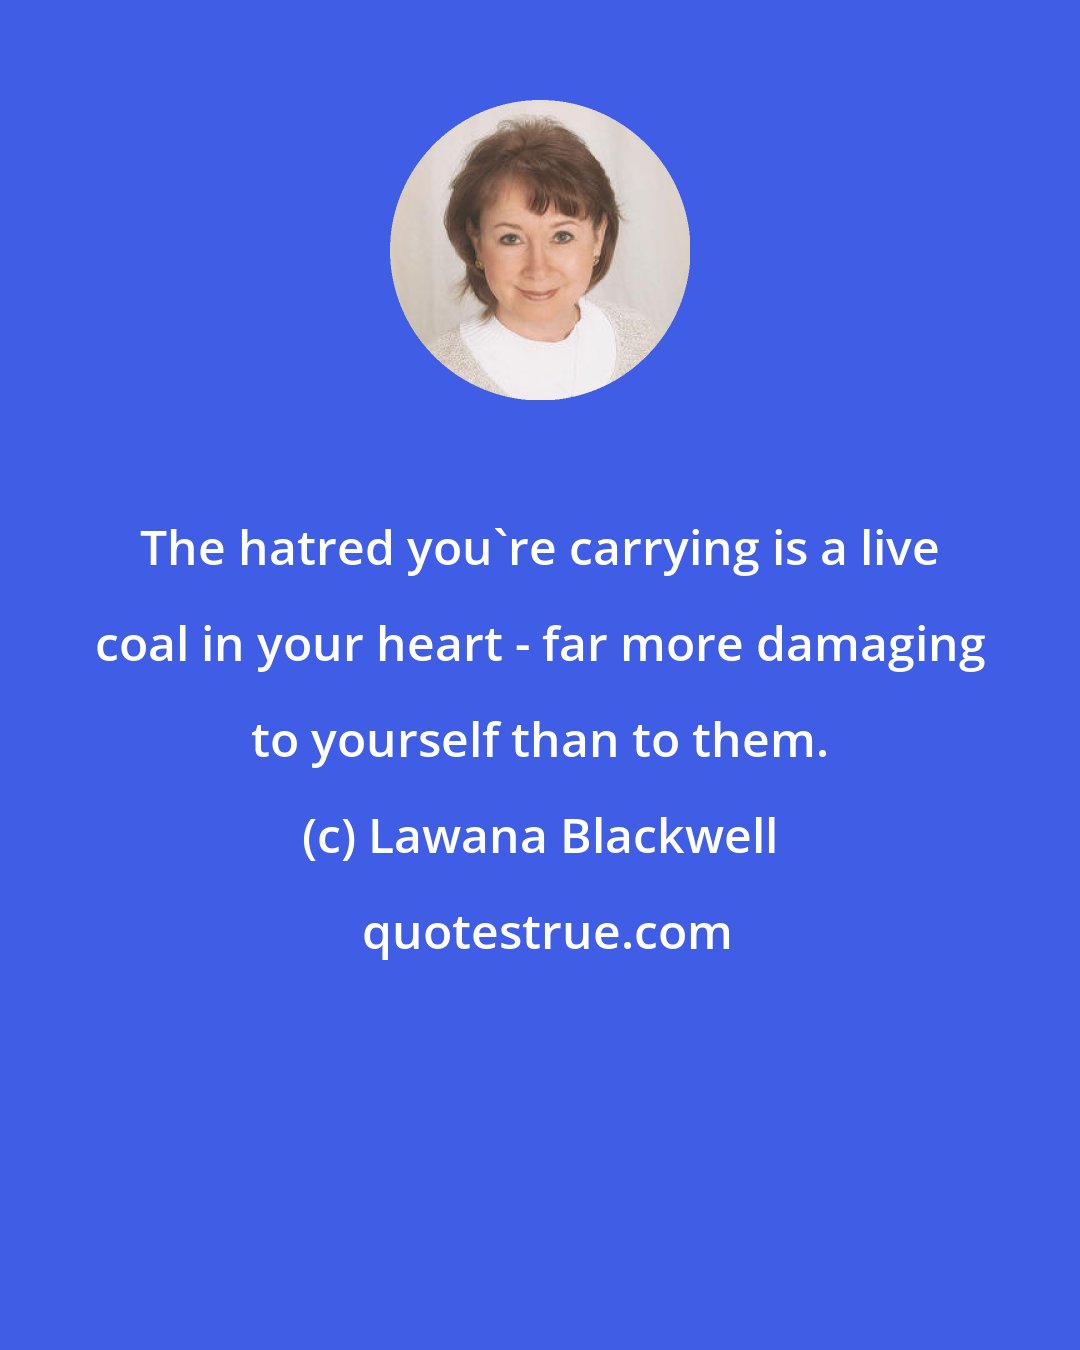 Lawana Blackwell: The hatred you're carrying is a live coal in your heart - far more damaging to yourself than to them.